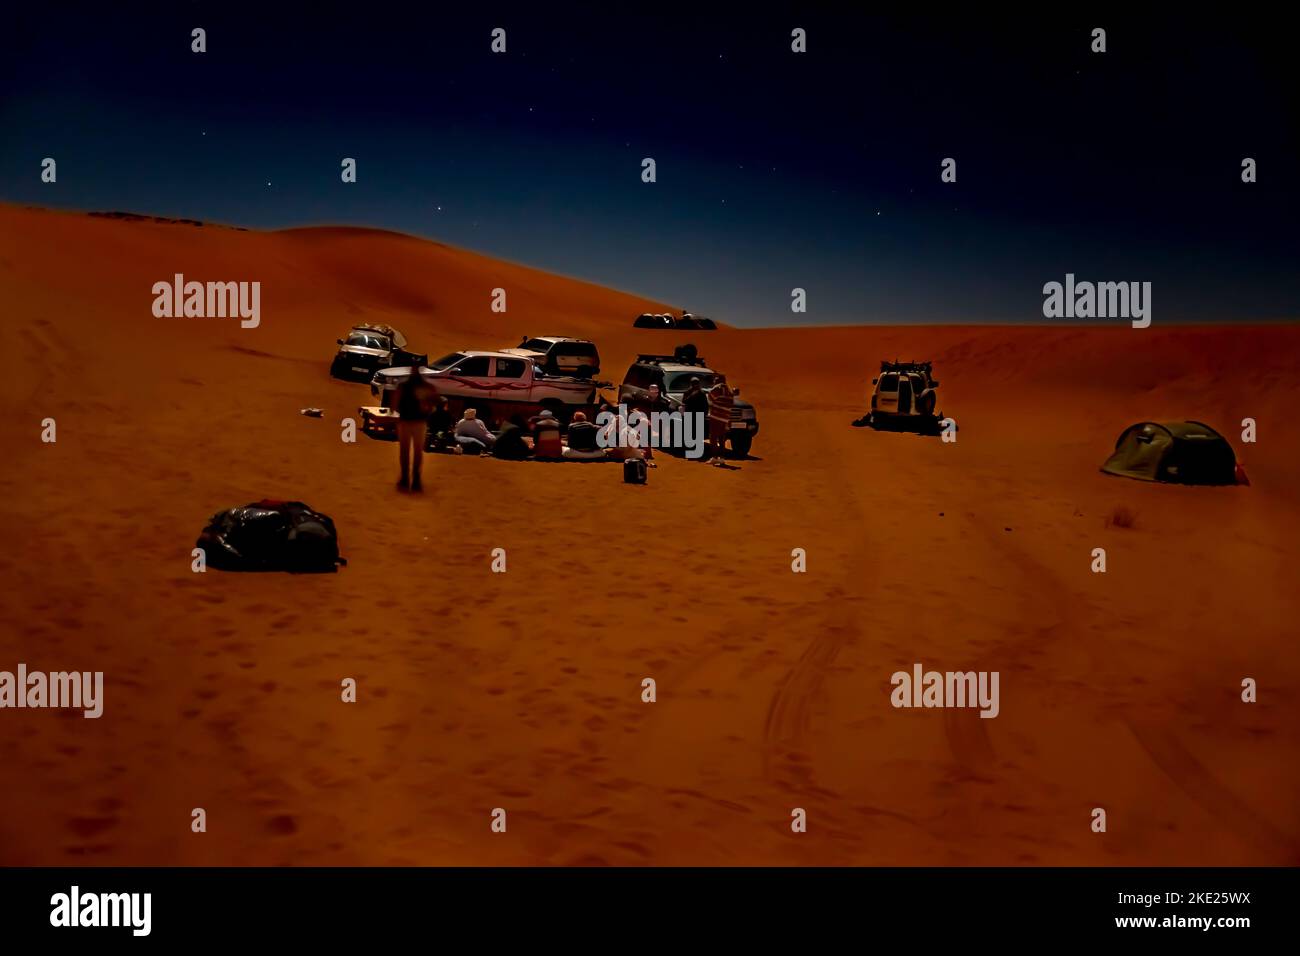 Unrecognizable group of tourists and tuareg camping in Sahara Desert by night. 4X4 vehicles parked, red colored sand dunes, stars in dark sky. Stock Photo